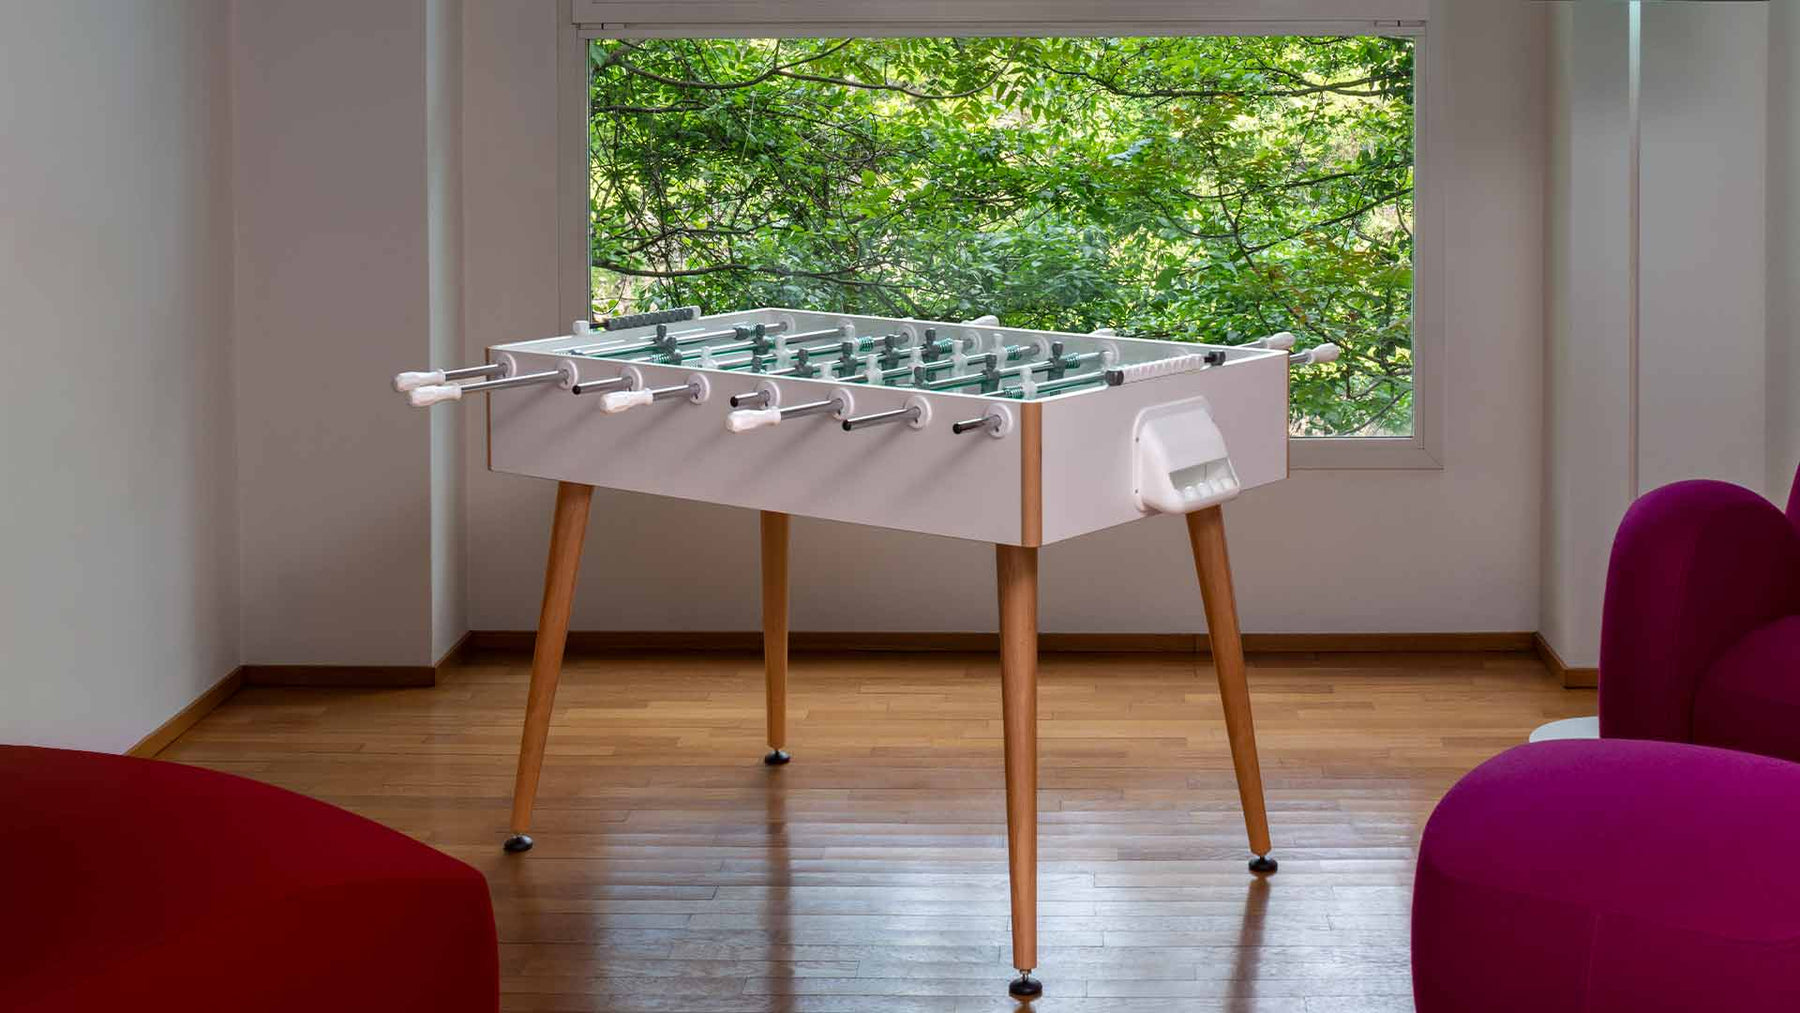 Have fun with friends and the whole family with stylish Foosball tables by FAS Pendezza - Design Italy